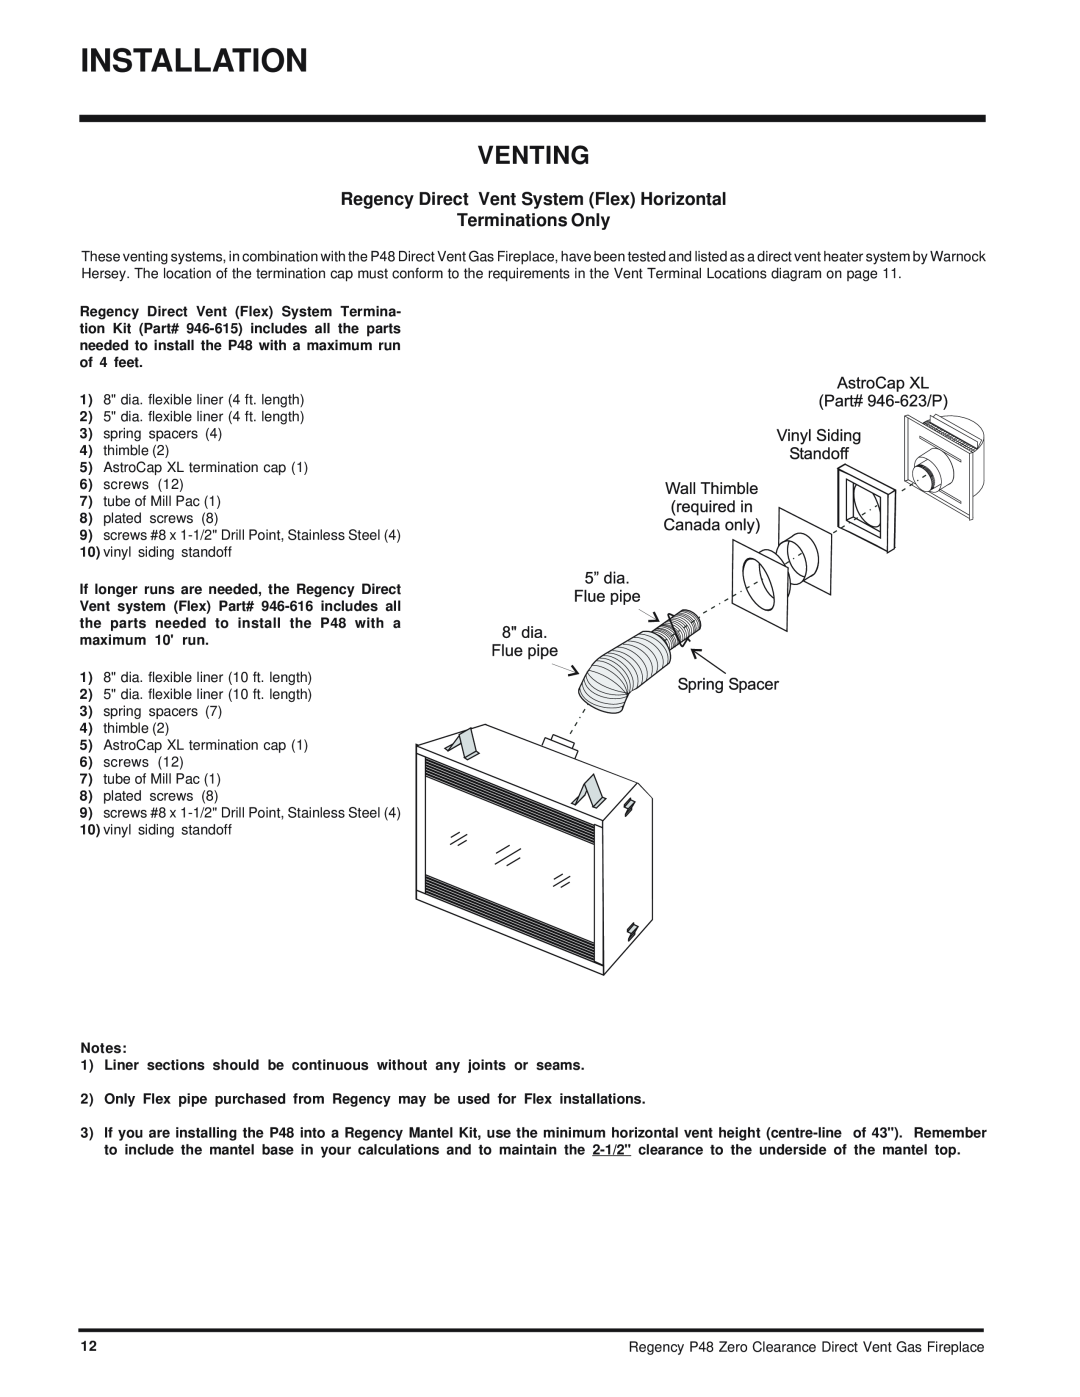 Regency P48-NG, P48-LP installation manual Venting, Regency Direct Vent System Flex Horizontal, Terminations Only, Notes 